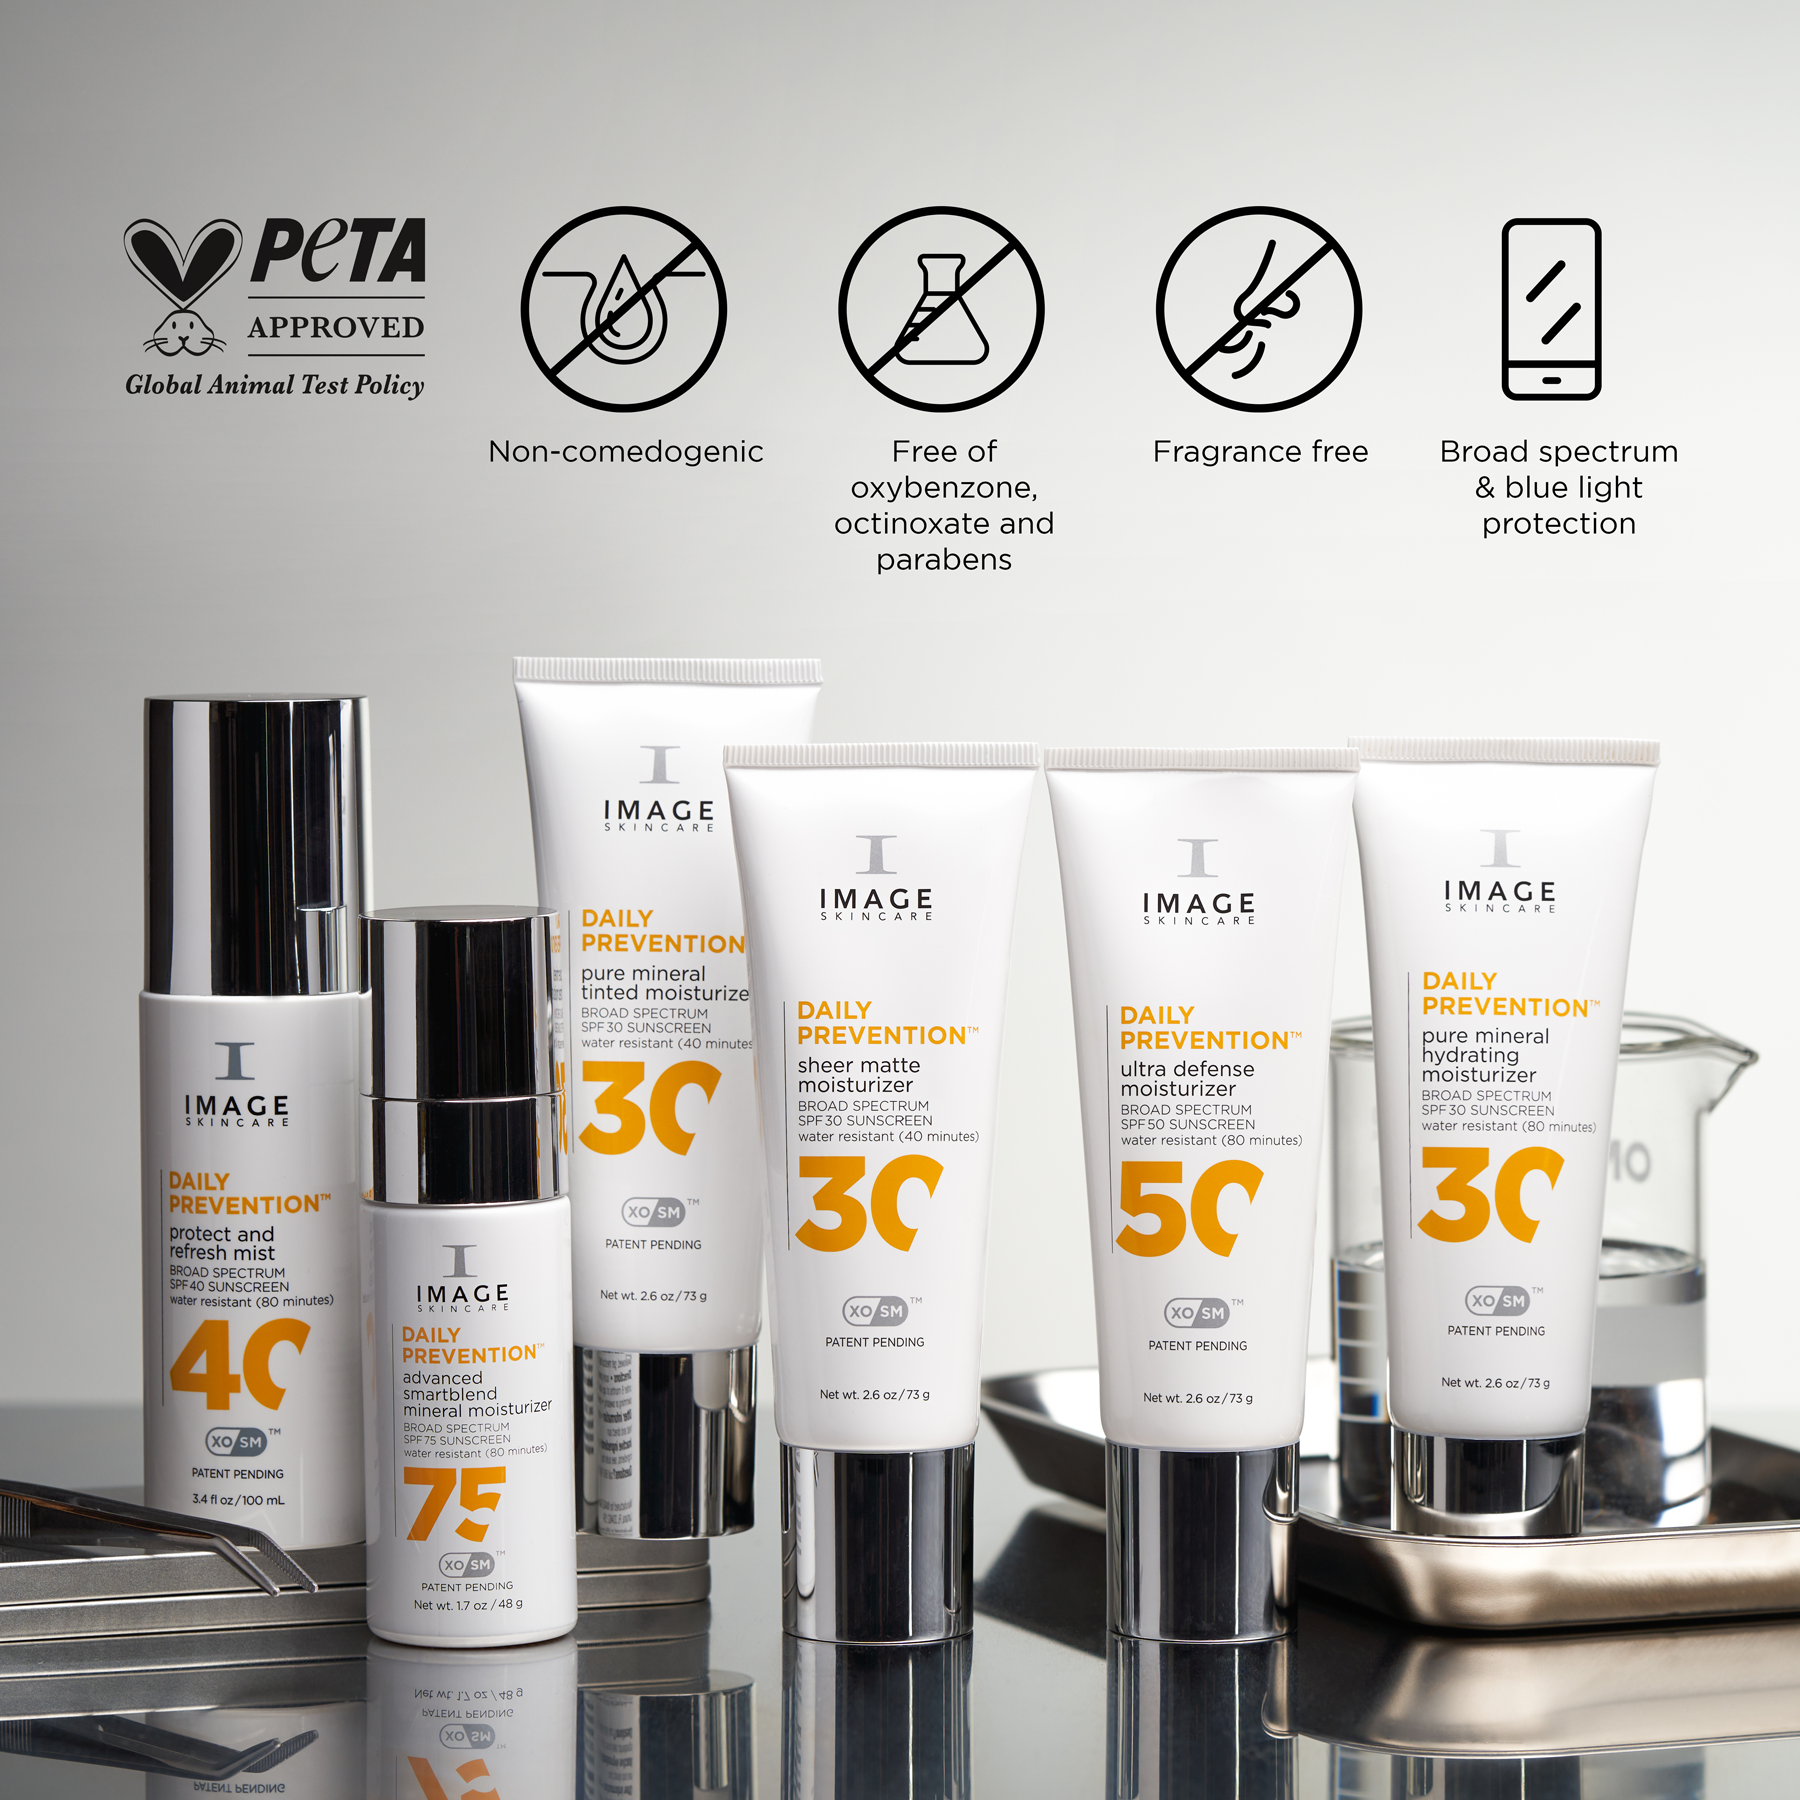 A display of all the DAILY Prevention skincare products, including pure mineral hydrating face moisturizer with sunscreen, from IMAGE Skincare.